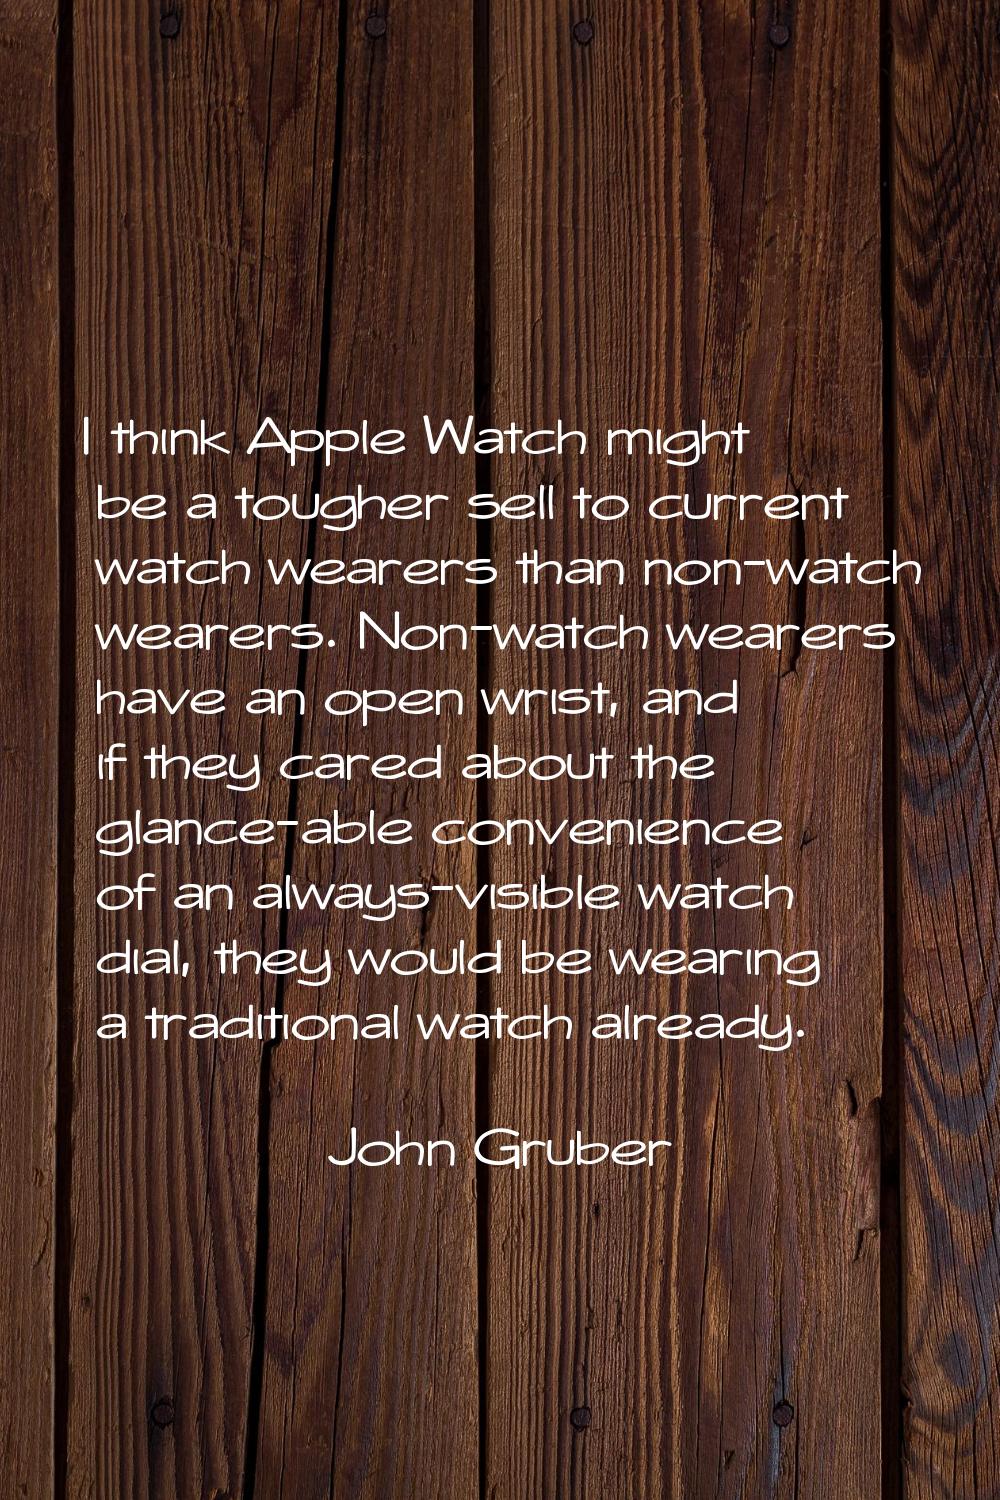 I think Apple Watch might be a tougher sell to current watch wearers than non-watch wearers. Non-wa